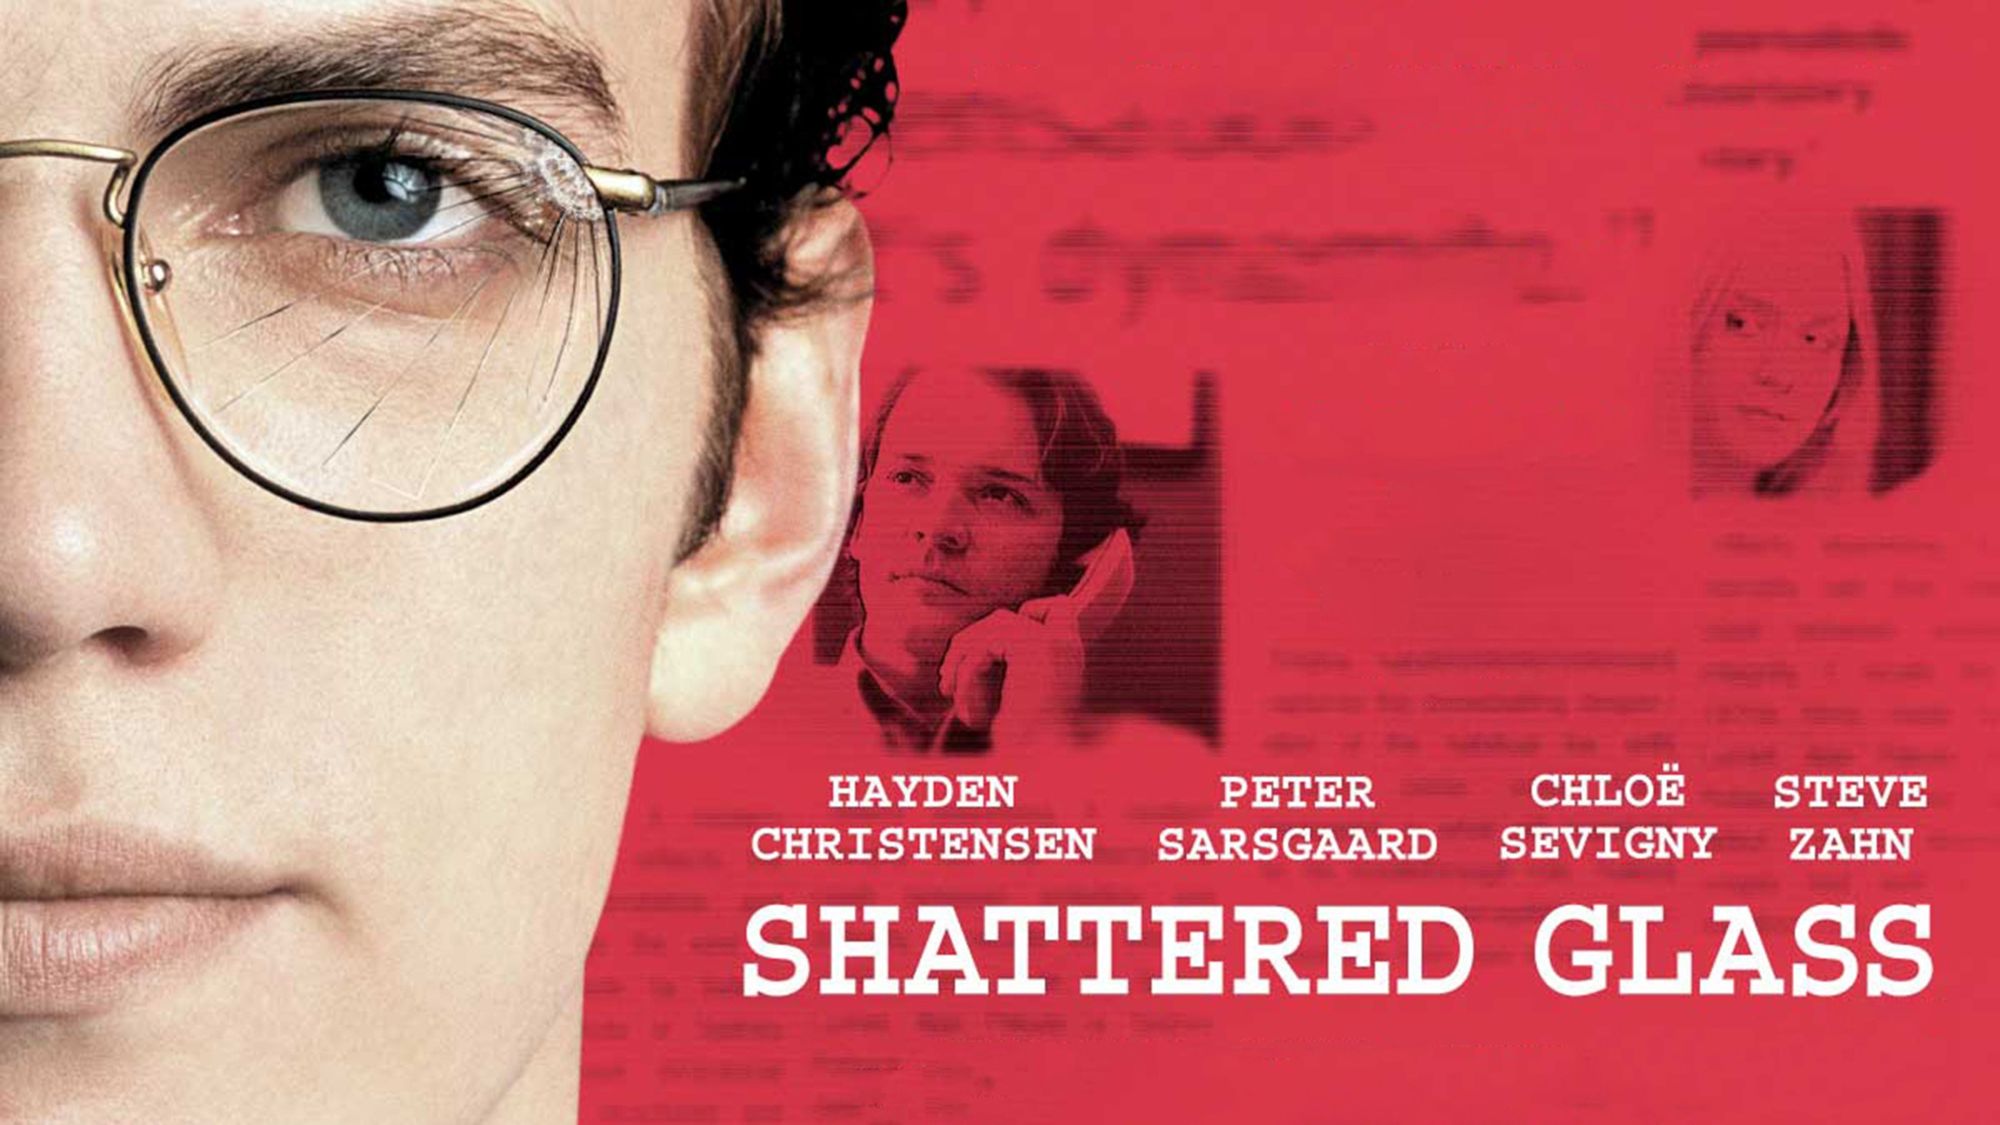 37-facts-about-the-movie-shattered-glass